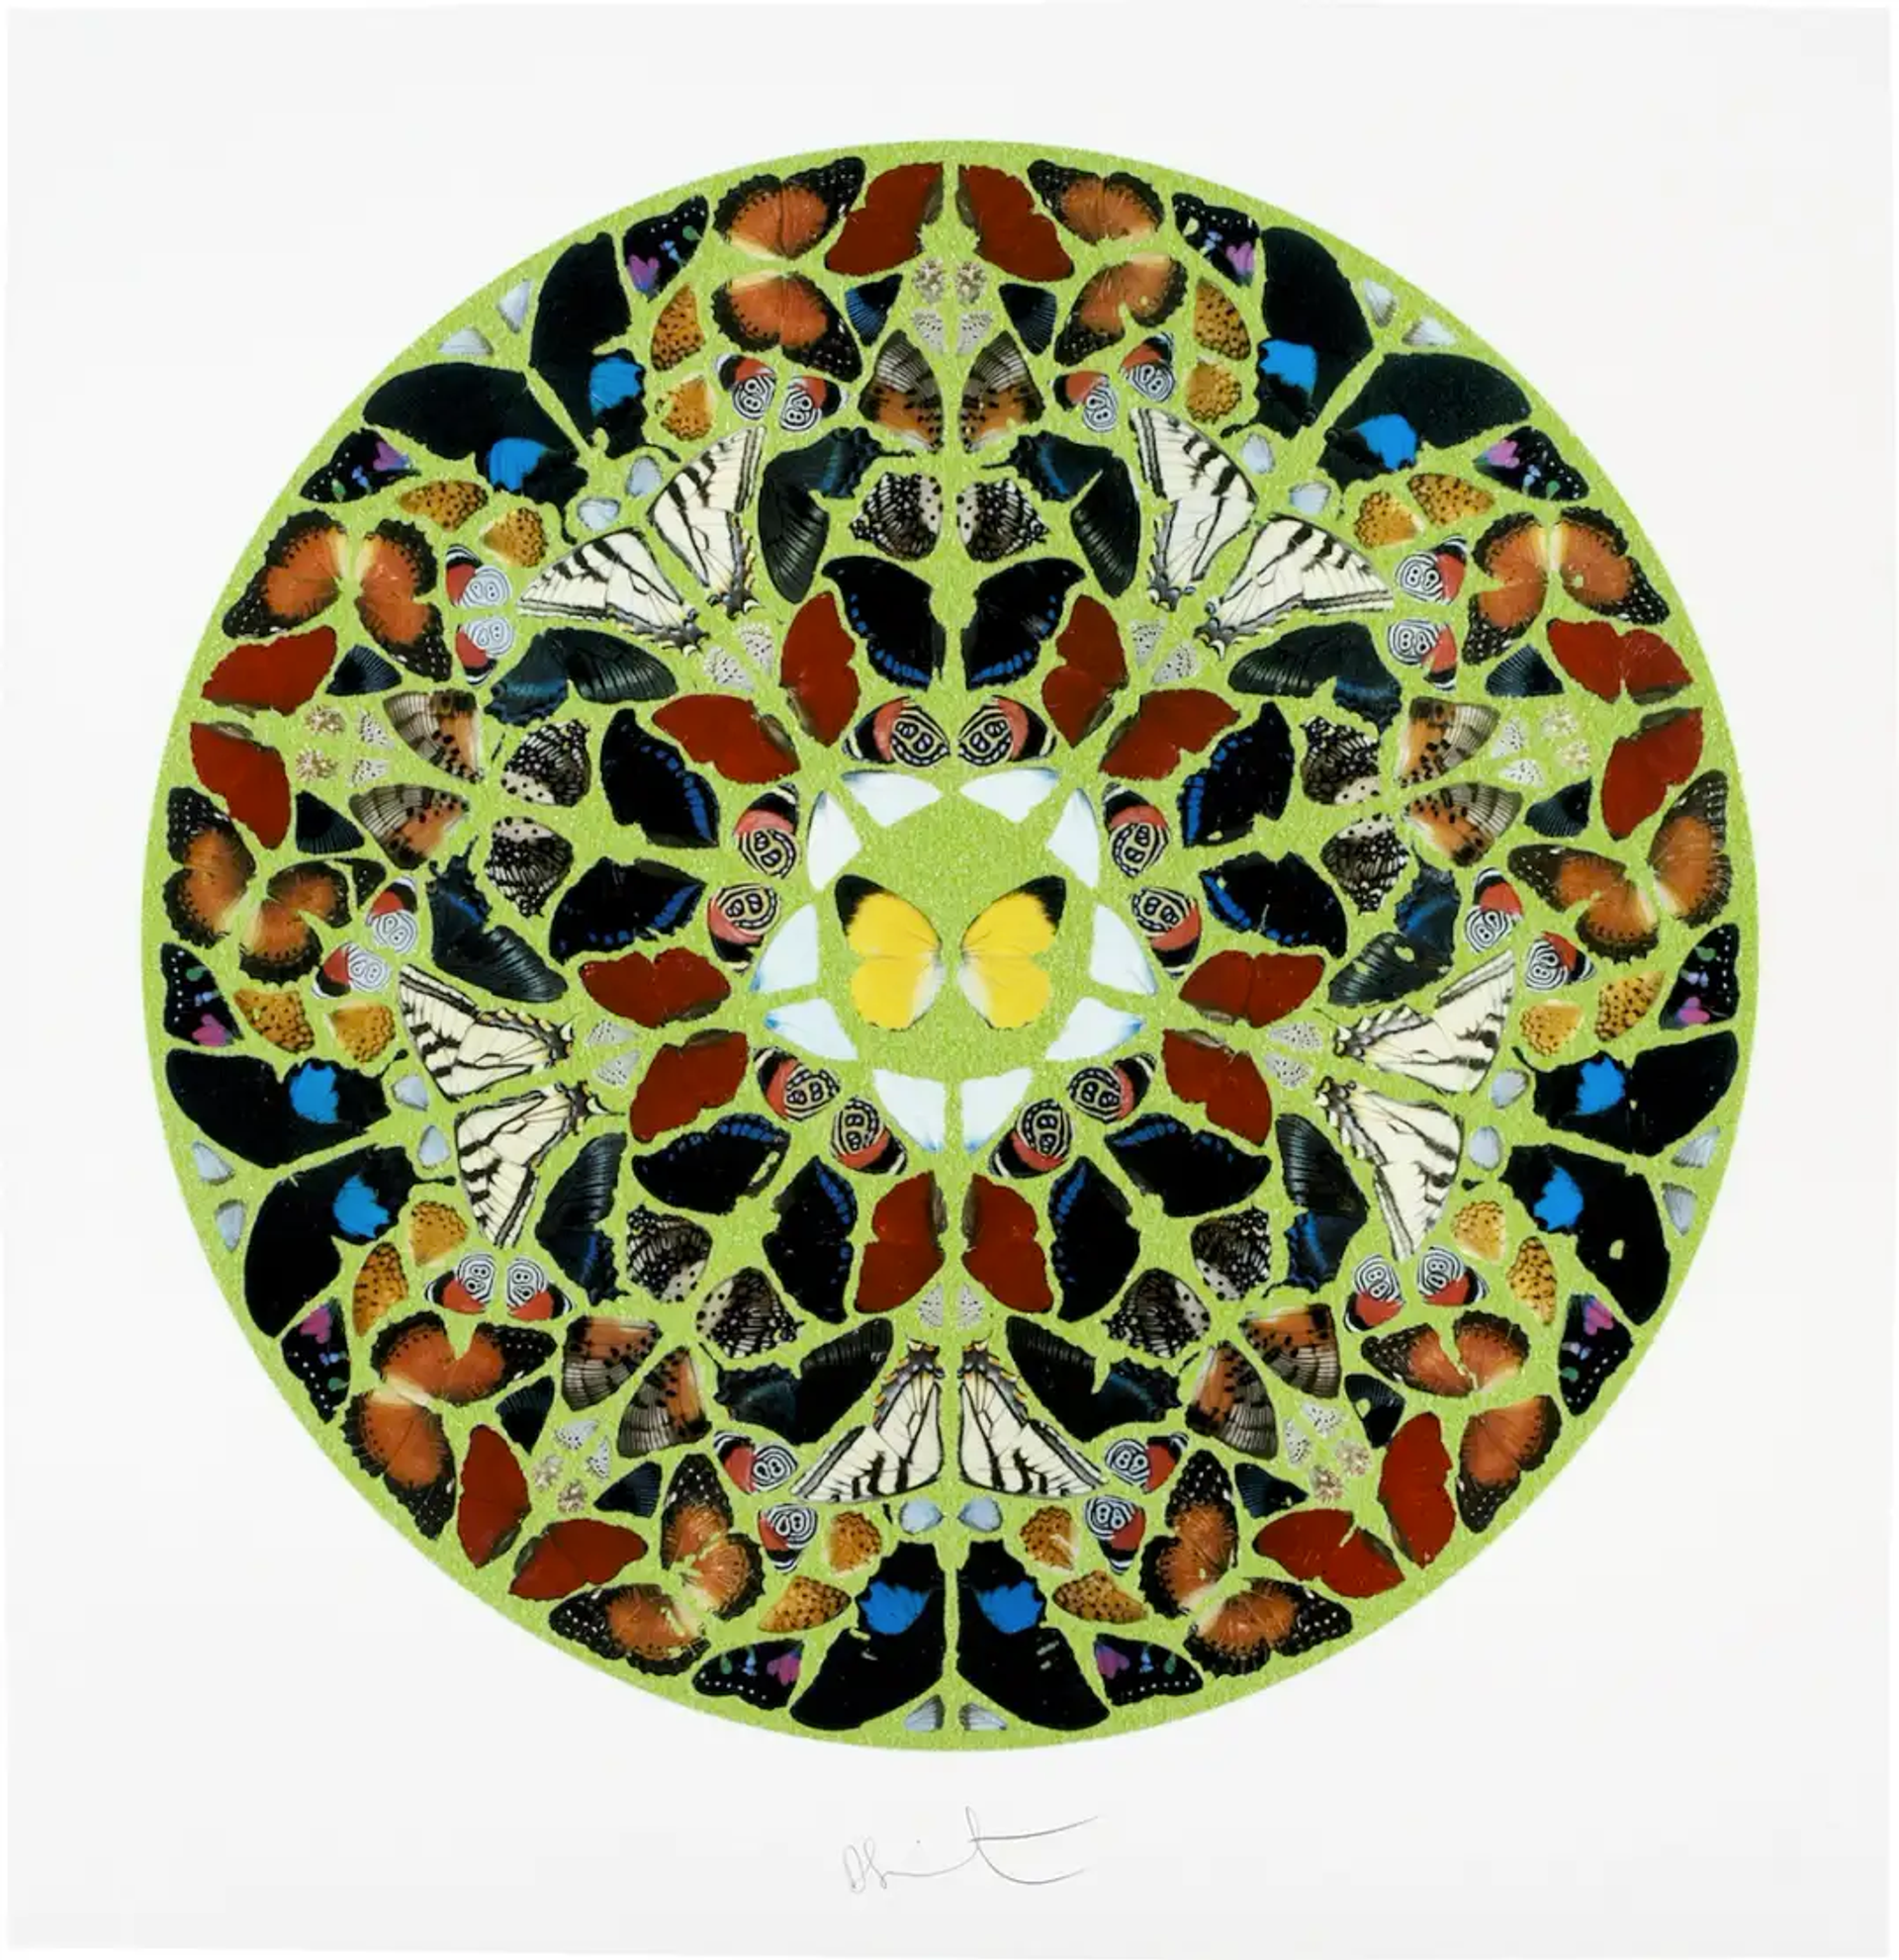 Damien Hirst’s Preoccupation with Kaleidoscopes